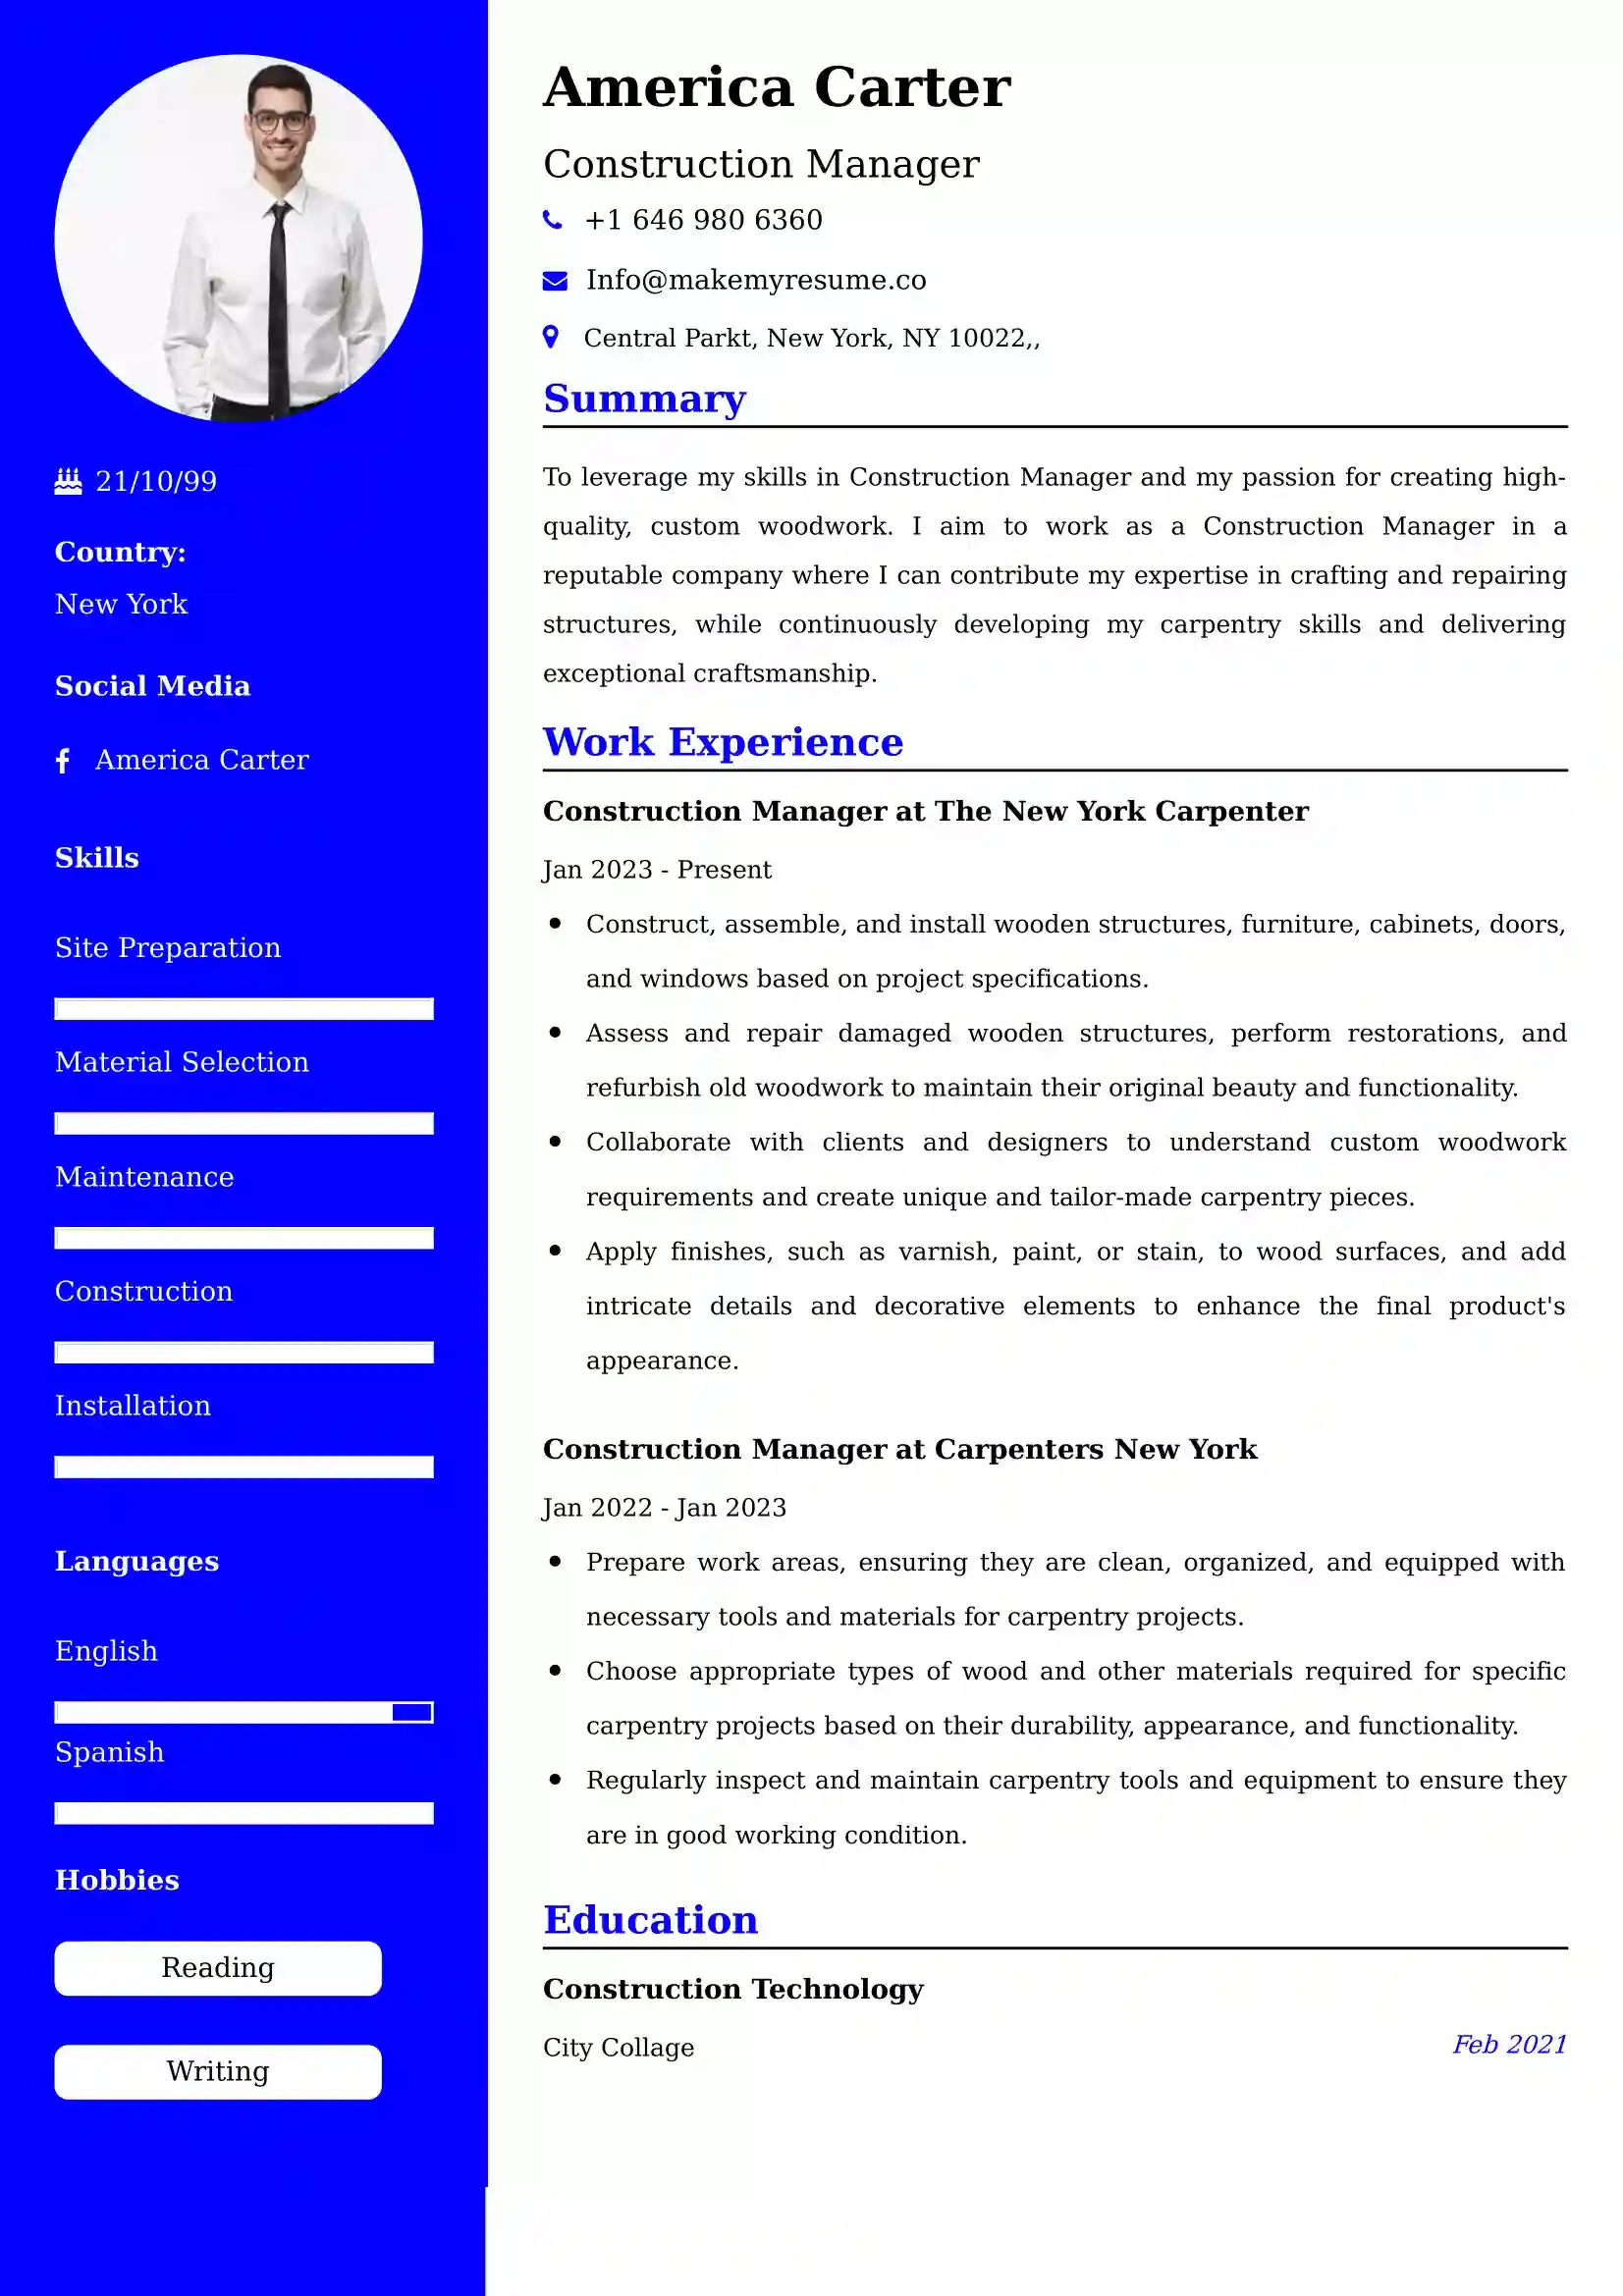 Construction Manager Resume Examples for UK Jobs - Tips and Guide